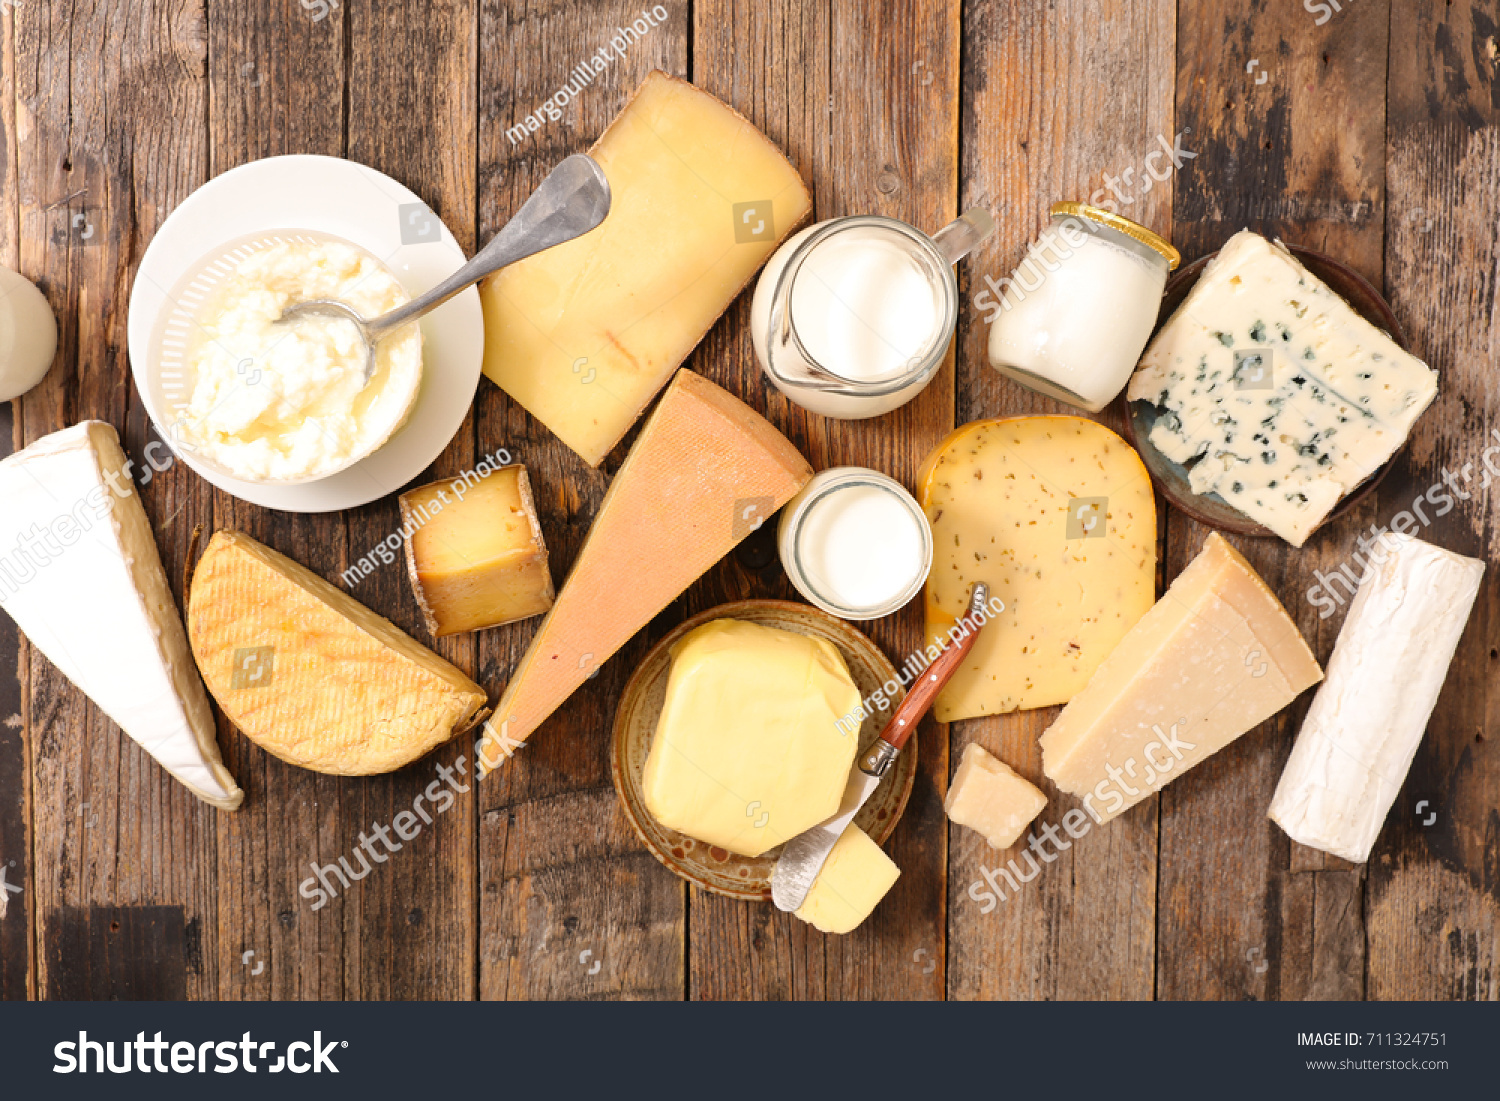 assorted dairy product #711324751